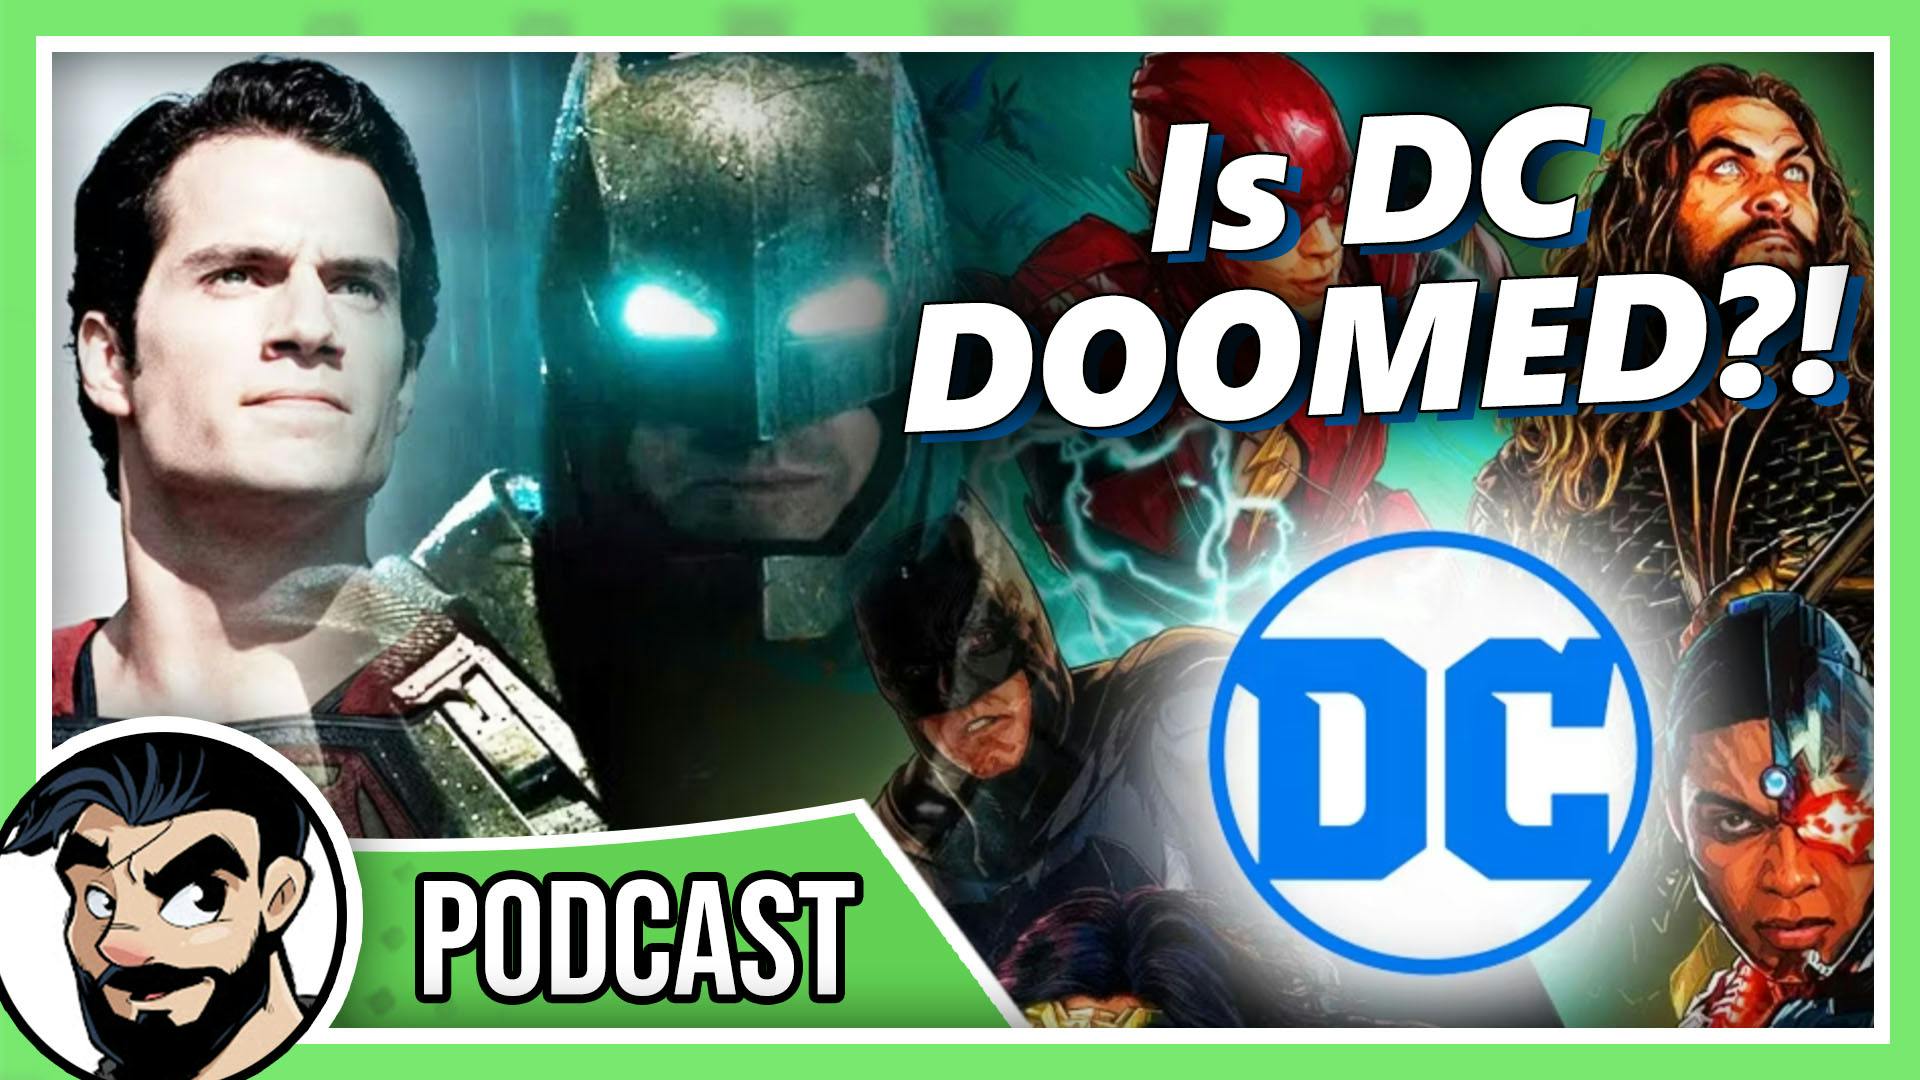 Is DC Doomed? Can They Bounce Back?